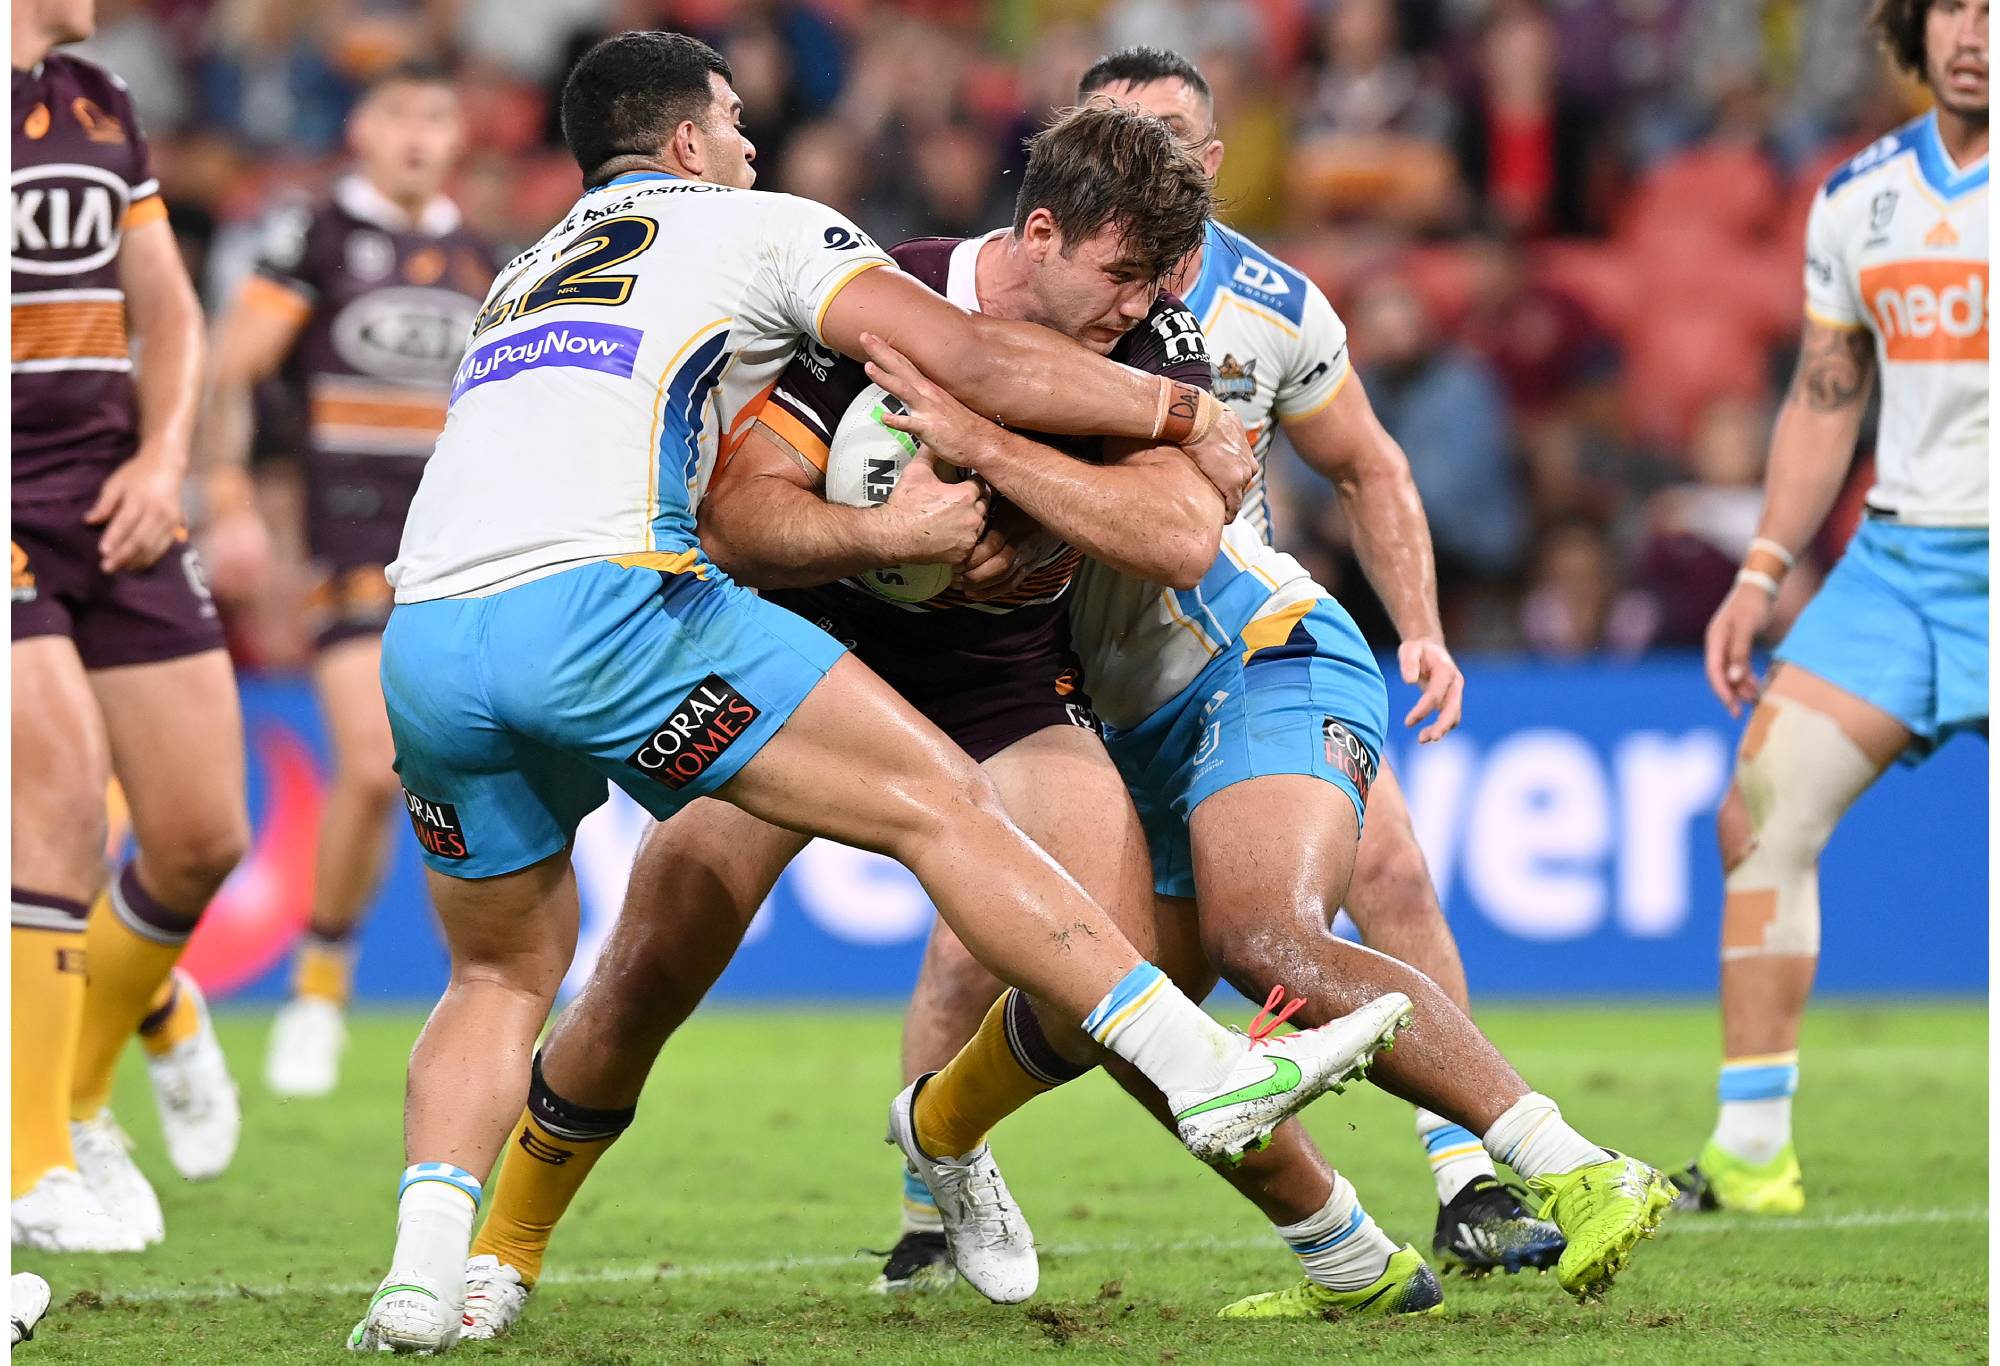 BRISBANE, AUSTRALIA - APRIL 30: Patrick Carrigan of the Broncos is tackled during the round 8 NRL match between the Brisbane Broncos and the Gold Coast Titans at Suncorp Stadium, on April 30, 2021, in Brisbane, Australia. (Photo by Bradley Kanaris/Getty Images)